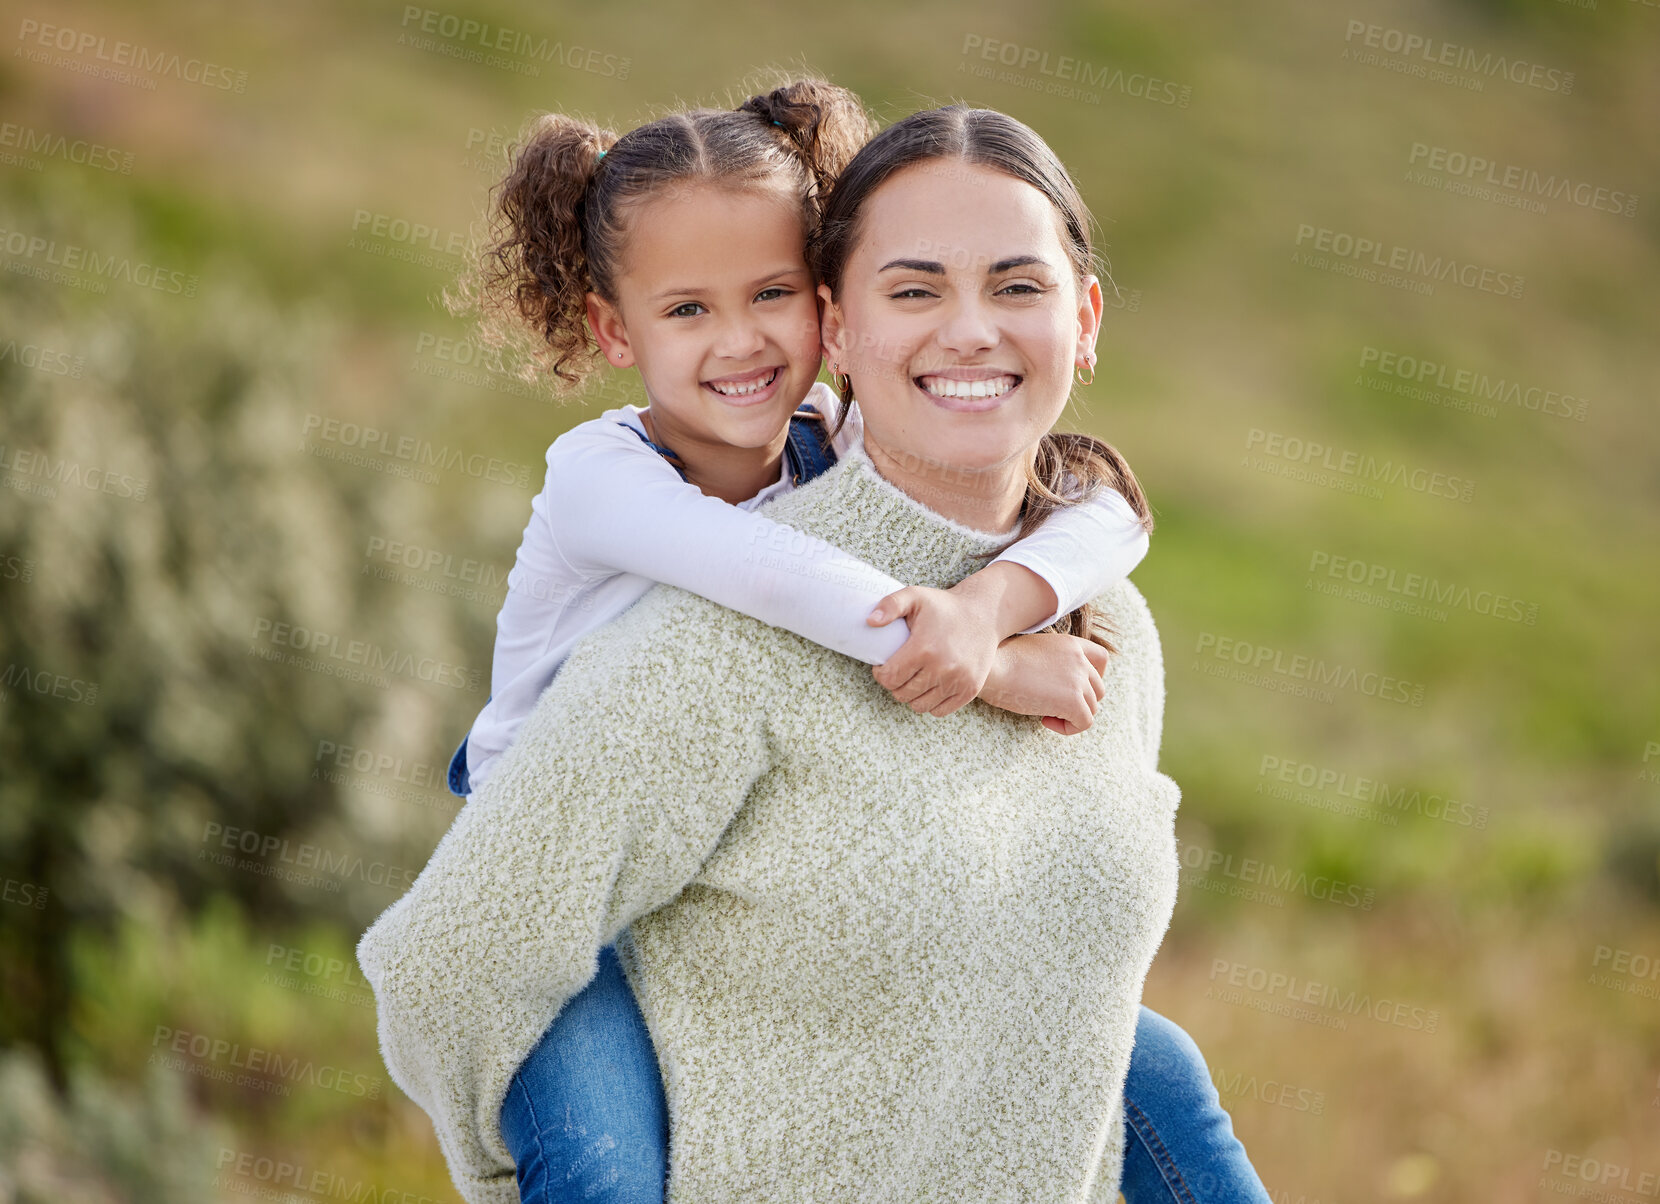 Buy stock photo Shot of a woman spending time outdoors with her daughter